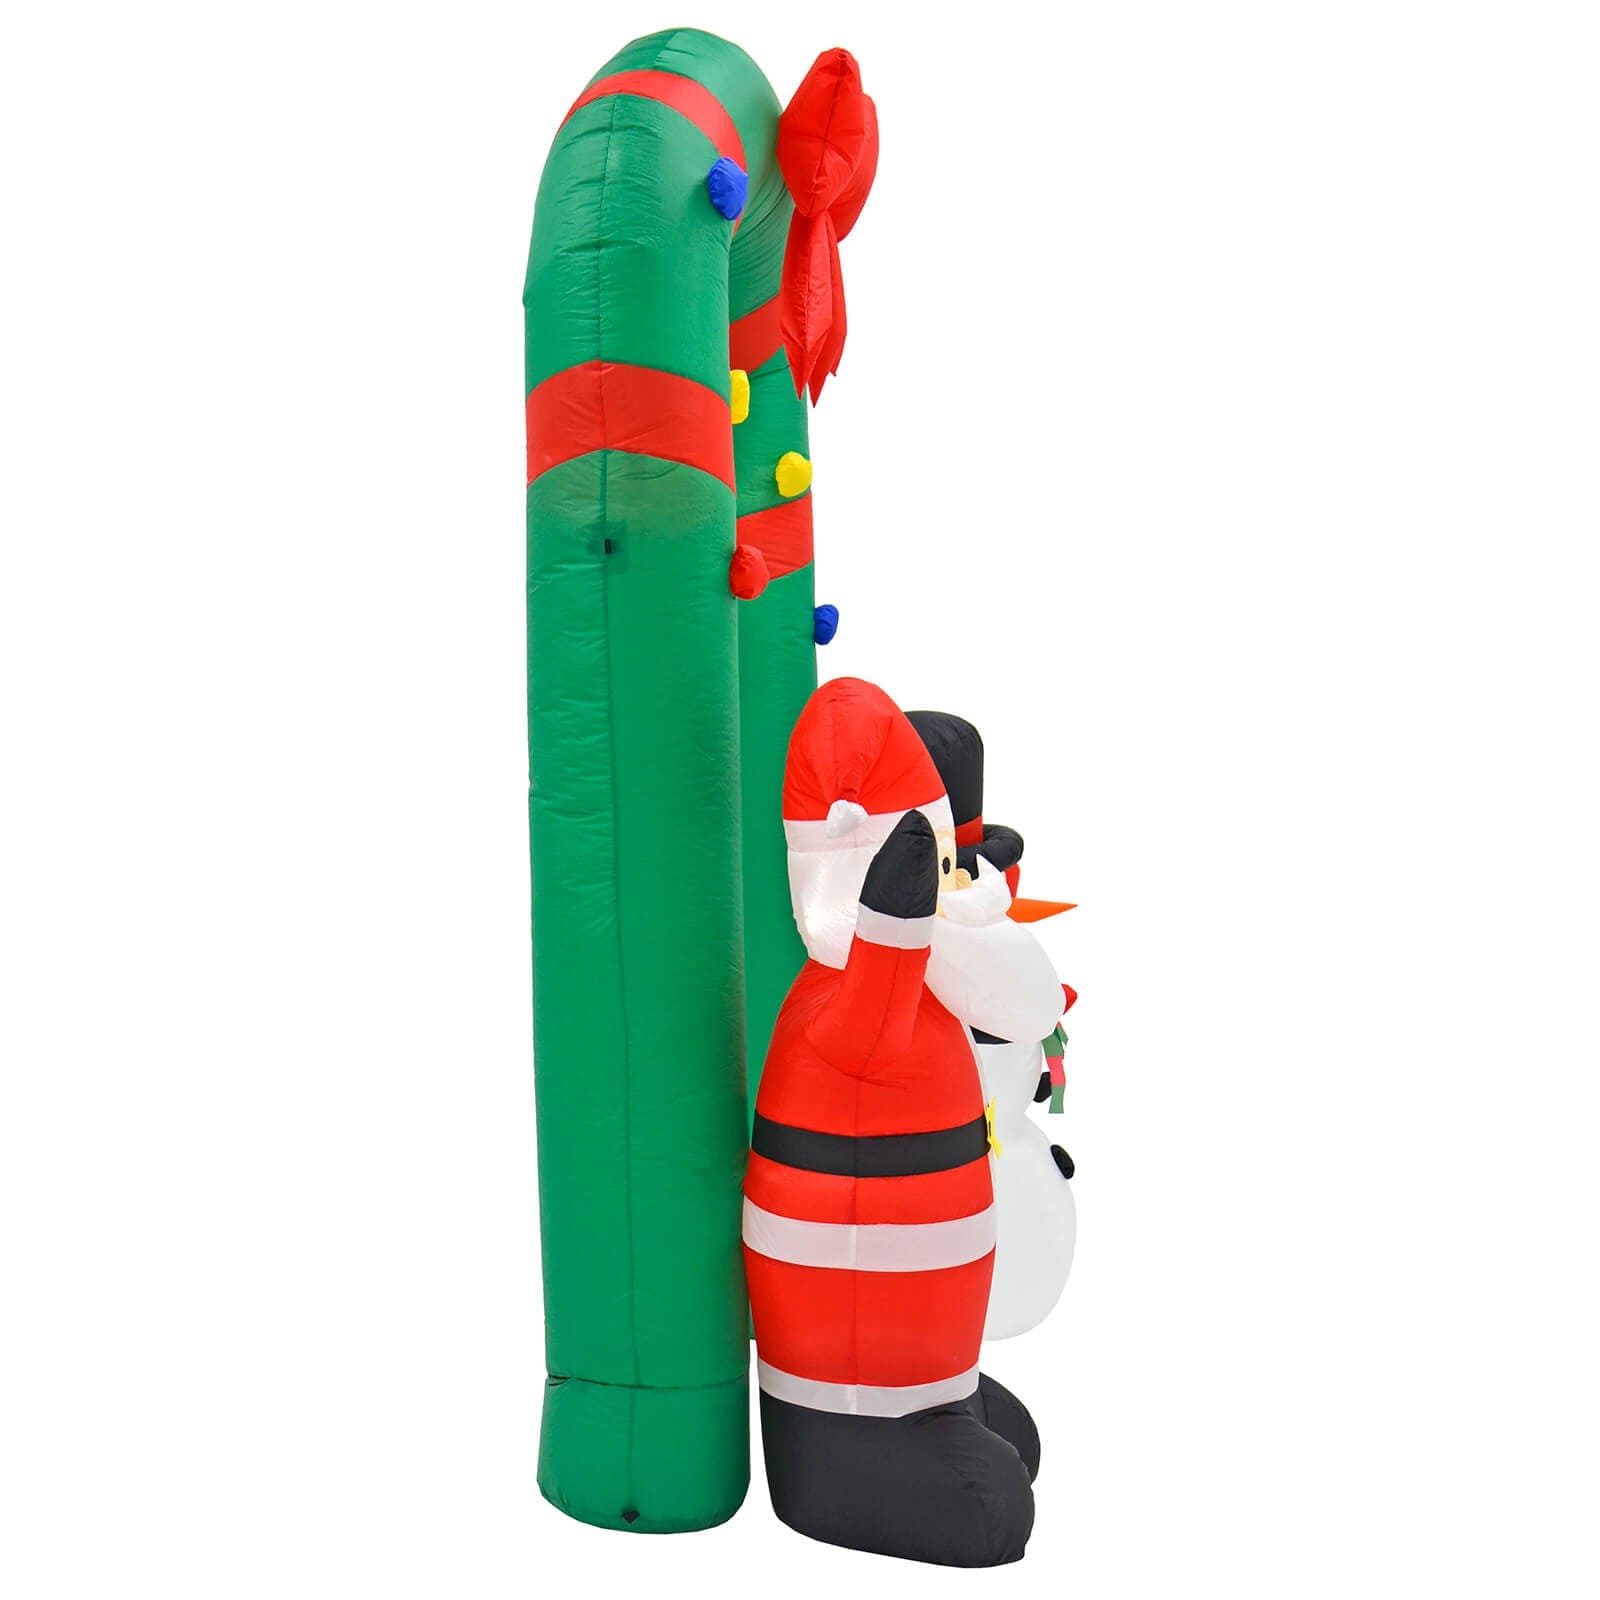 Side view of a large inflatable Arch Christmas decoration with Santa and snowman, green garland style arch with red bow